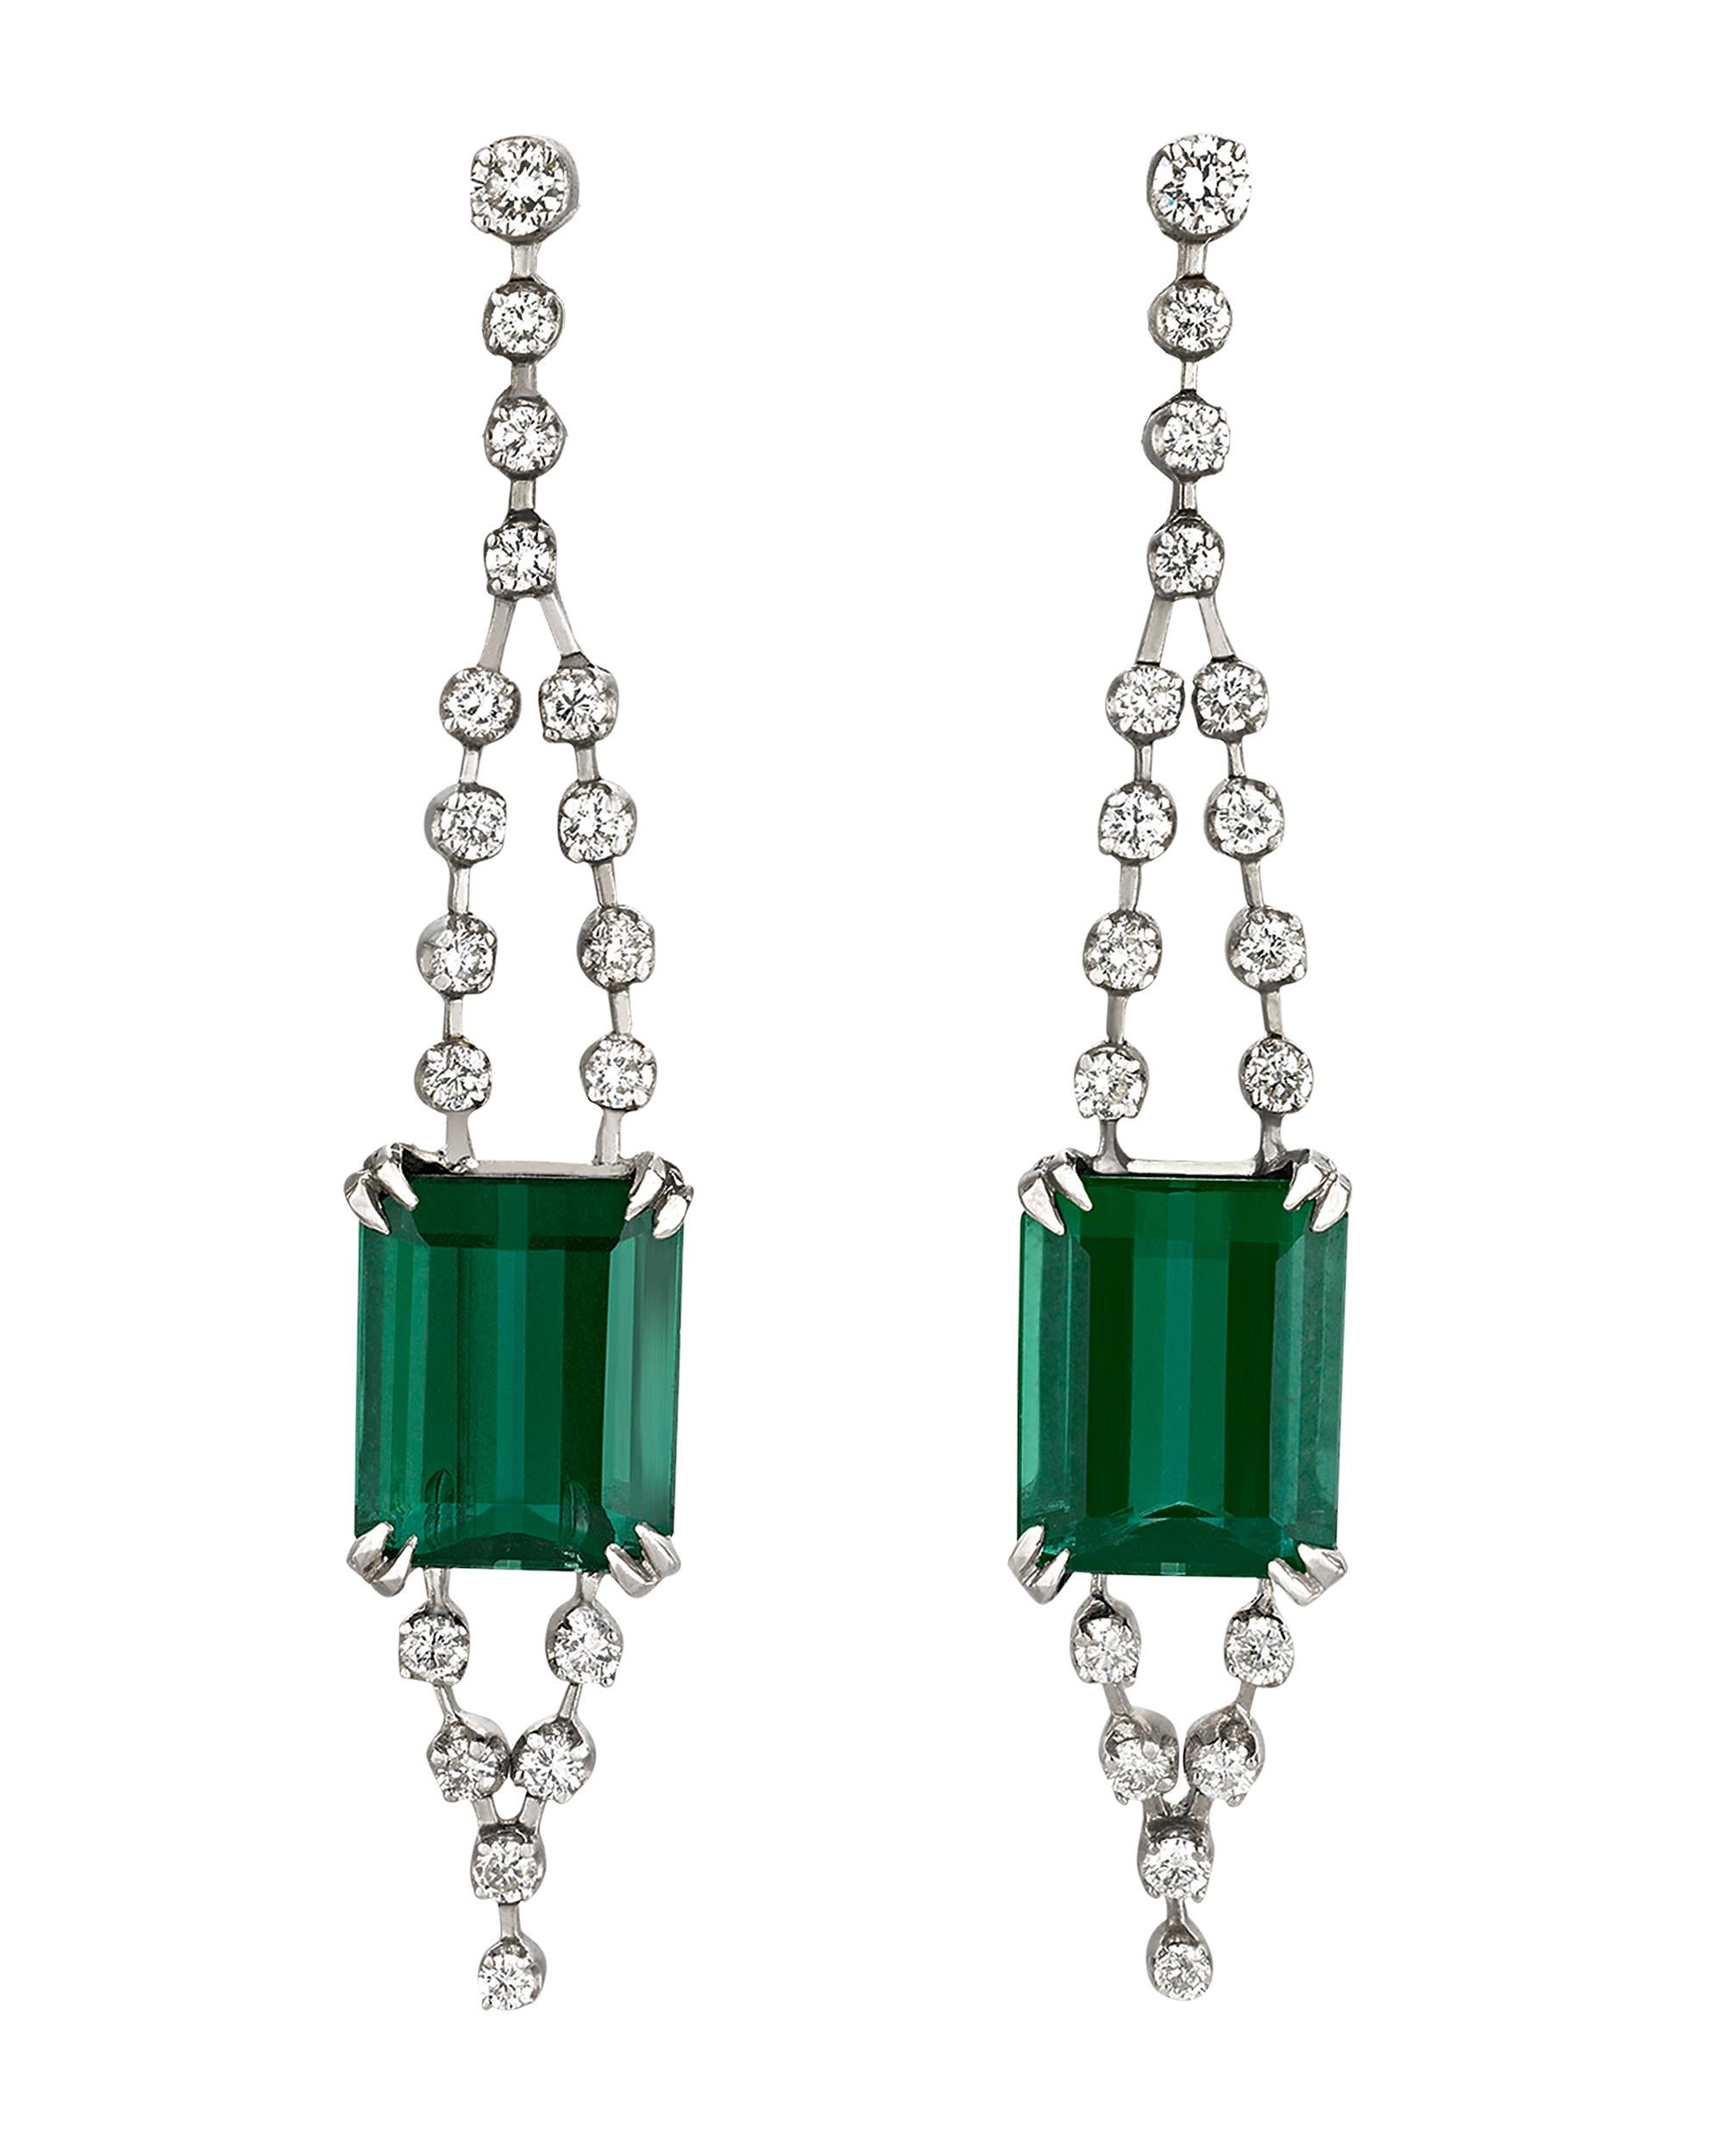 Brilliant and bold, two rare emerald-cut green tourmalines totaling approximately 7.00 carats dazzle beyond measure in these elegant drop earrings by H. Stern. Displaying an attractive deep blue-green hue, these stones represent the tourmaline at